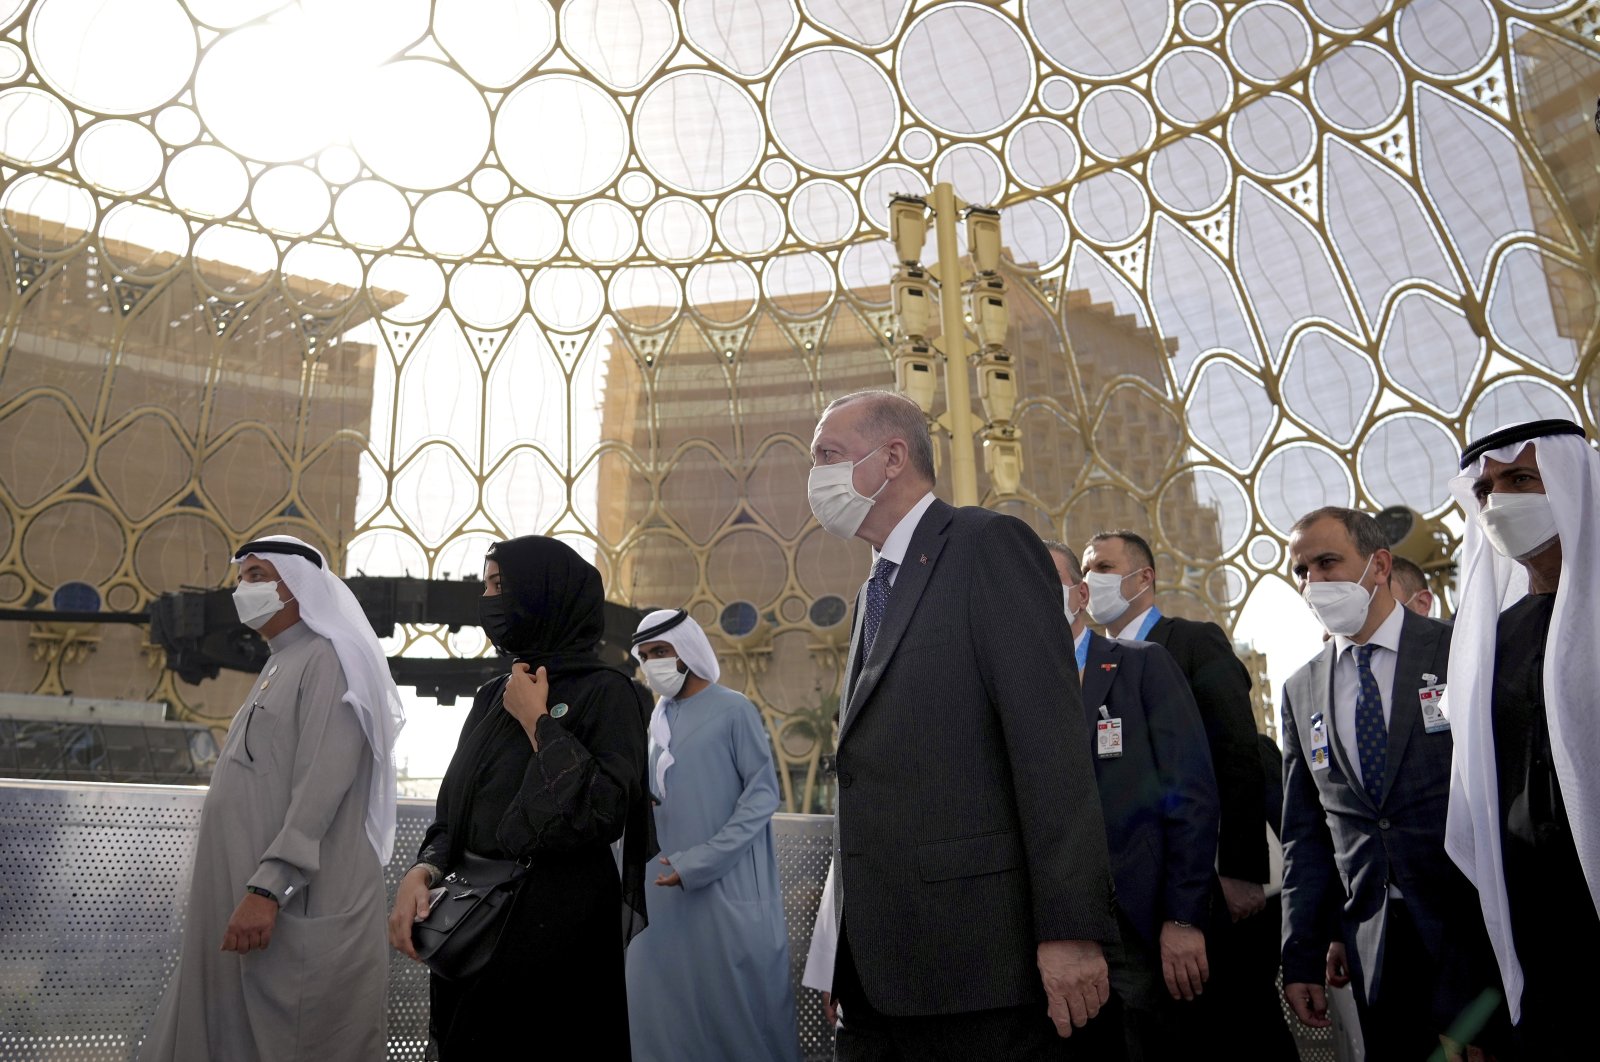 President Recep Tayyip Erdoğan visits the Dubai Expo 2020 during his visit to Dubai as part of the new normalization process with the United Arab Emirates (UAE), in Dubai, UAE, Feb. 15, 2022. (AP Photo)